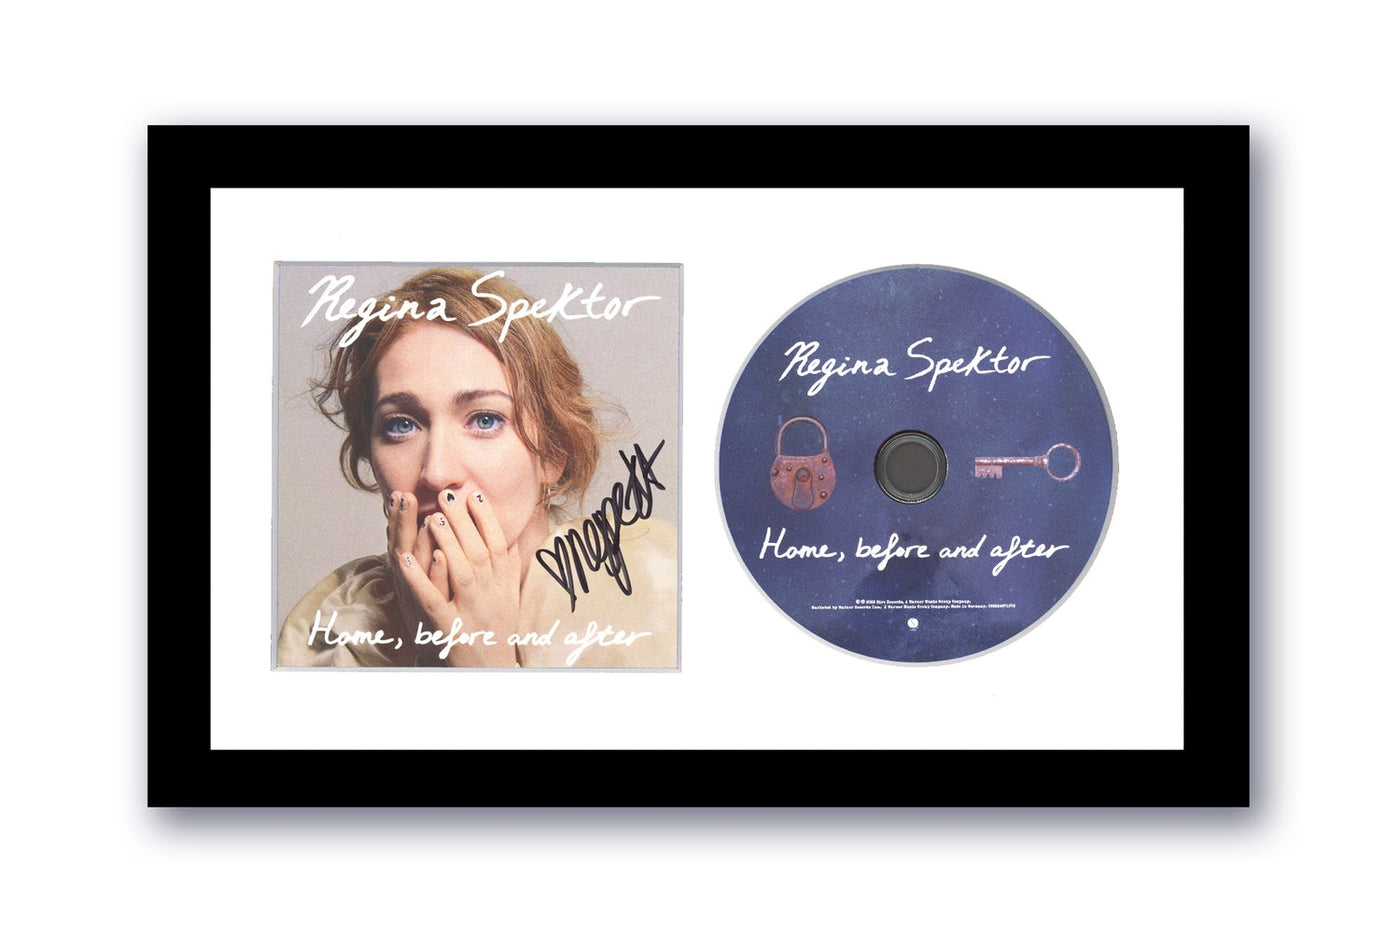 Regina Spektor Signed 7x12 Framed CD Home before and after Autographed ACOA #2